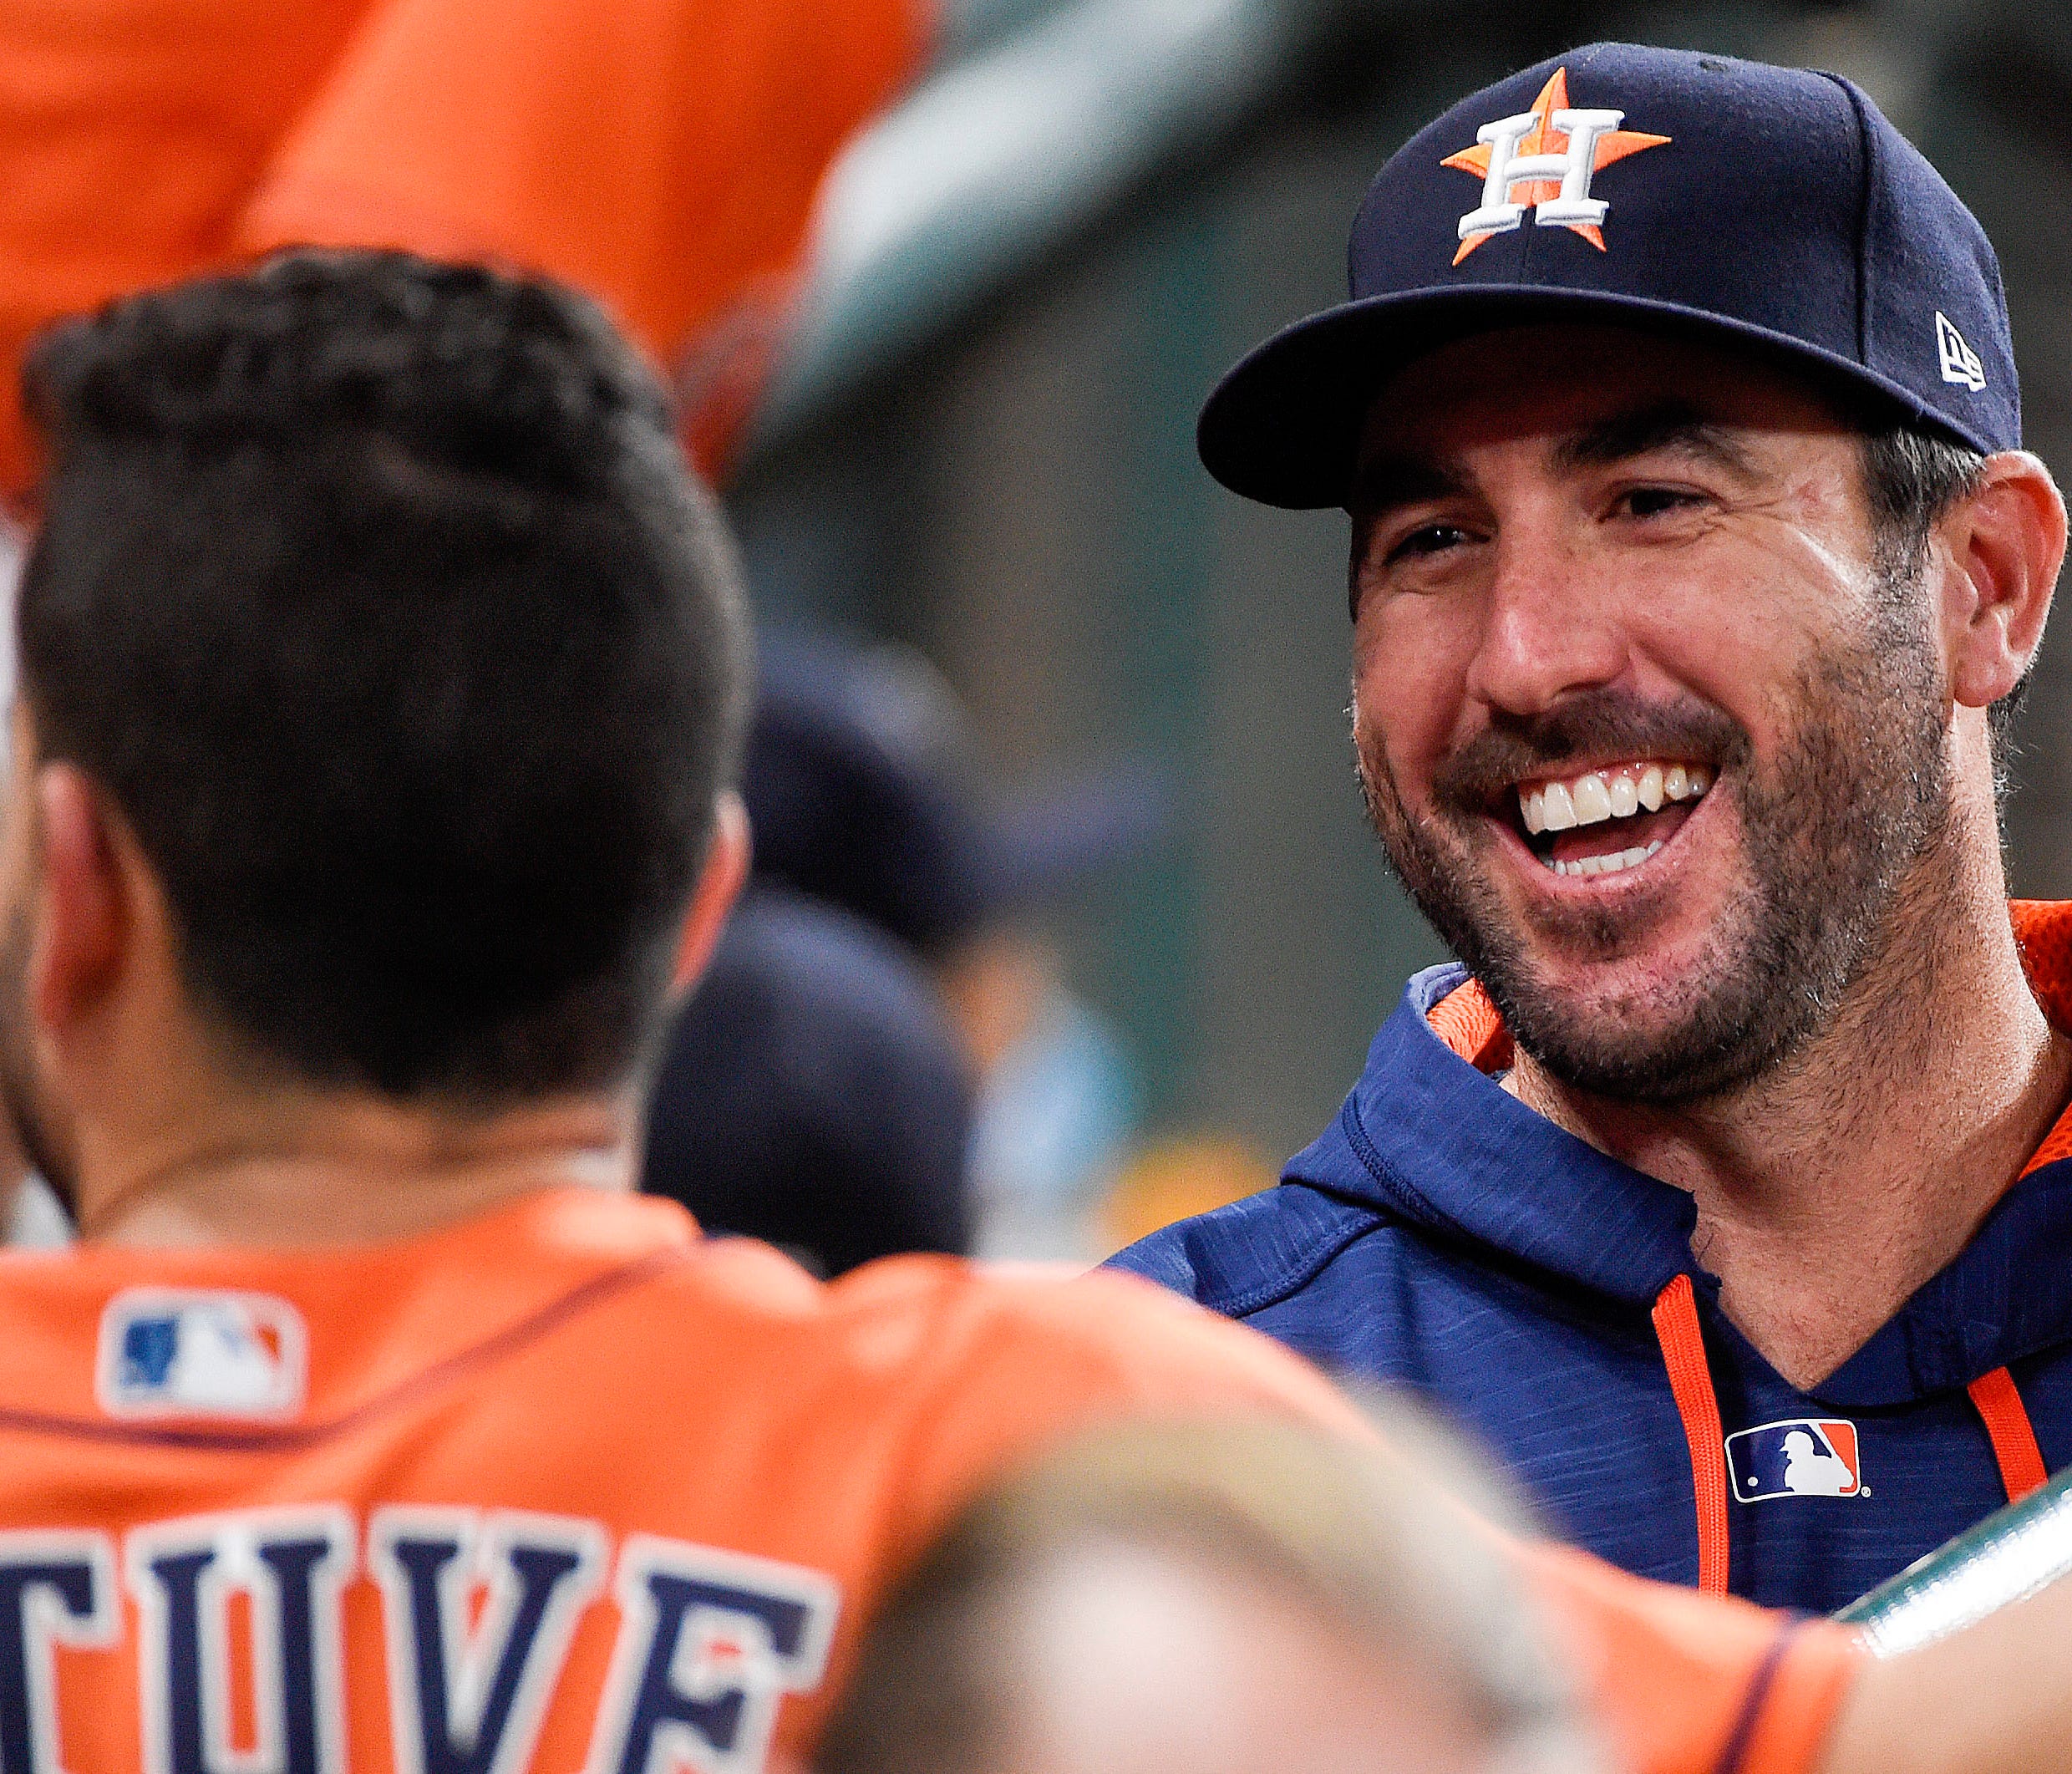 Houston Astros' Justin Verlander, right, laughs while talking to Jose Altuve during the second inning of the second game of a baseball doubleheader against the New York Mets, Saturday, Sept. 2, 2017, in Houston. (AP Photo/Eric Christian Smith) ORG XM